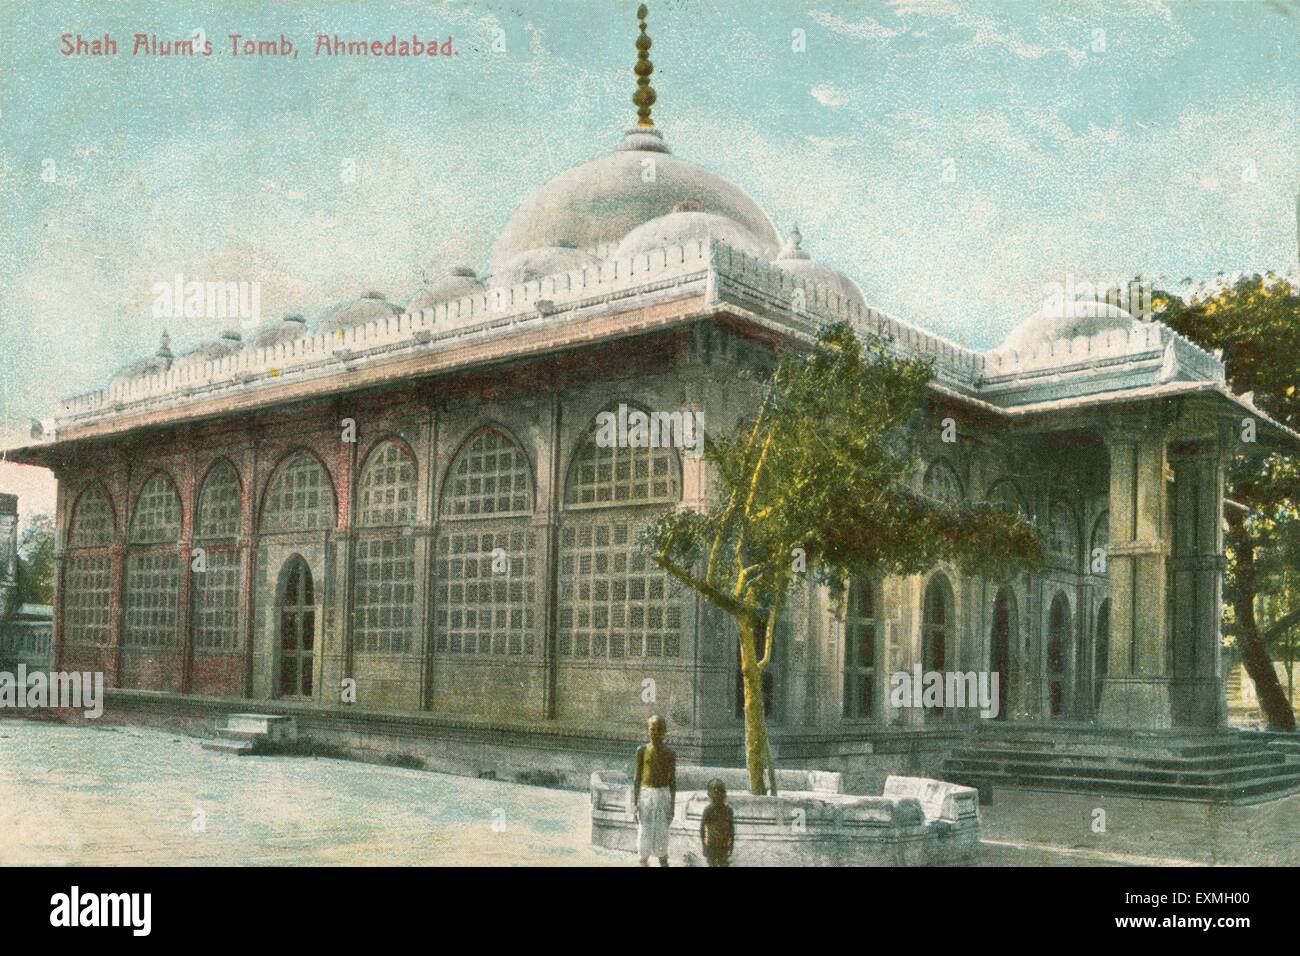 old vintage 1900s photo of stone mosque  Shah Alam tomb  Shah Alam